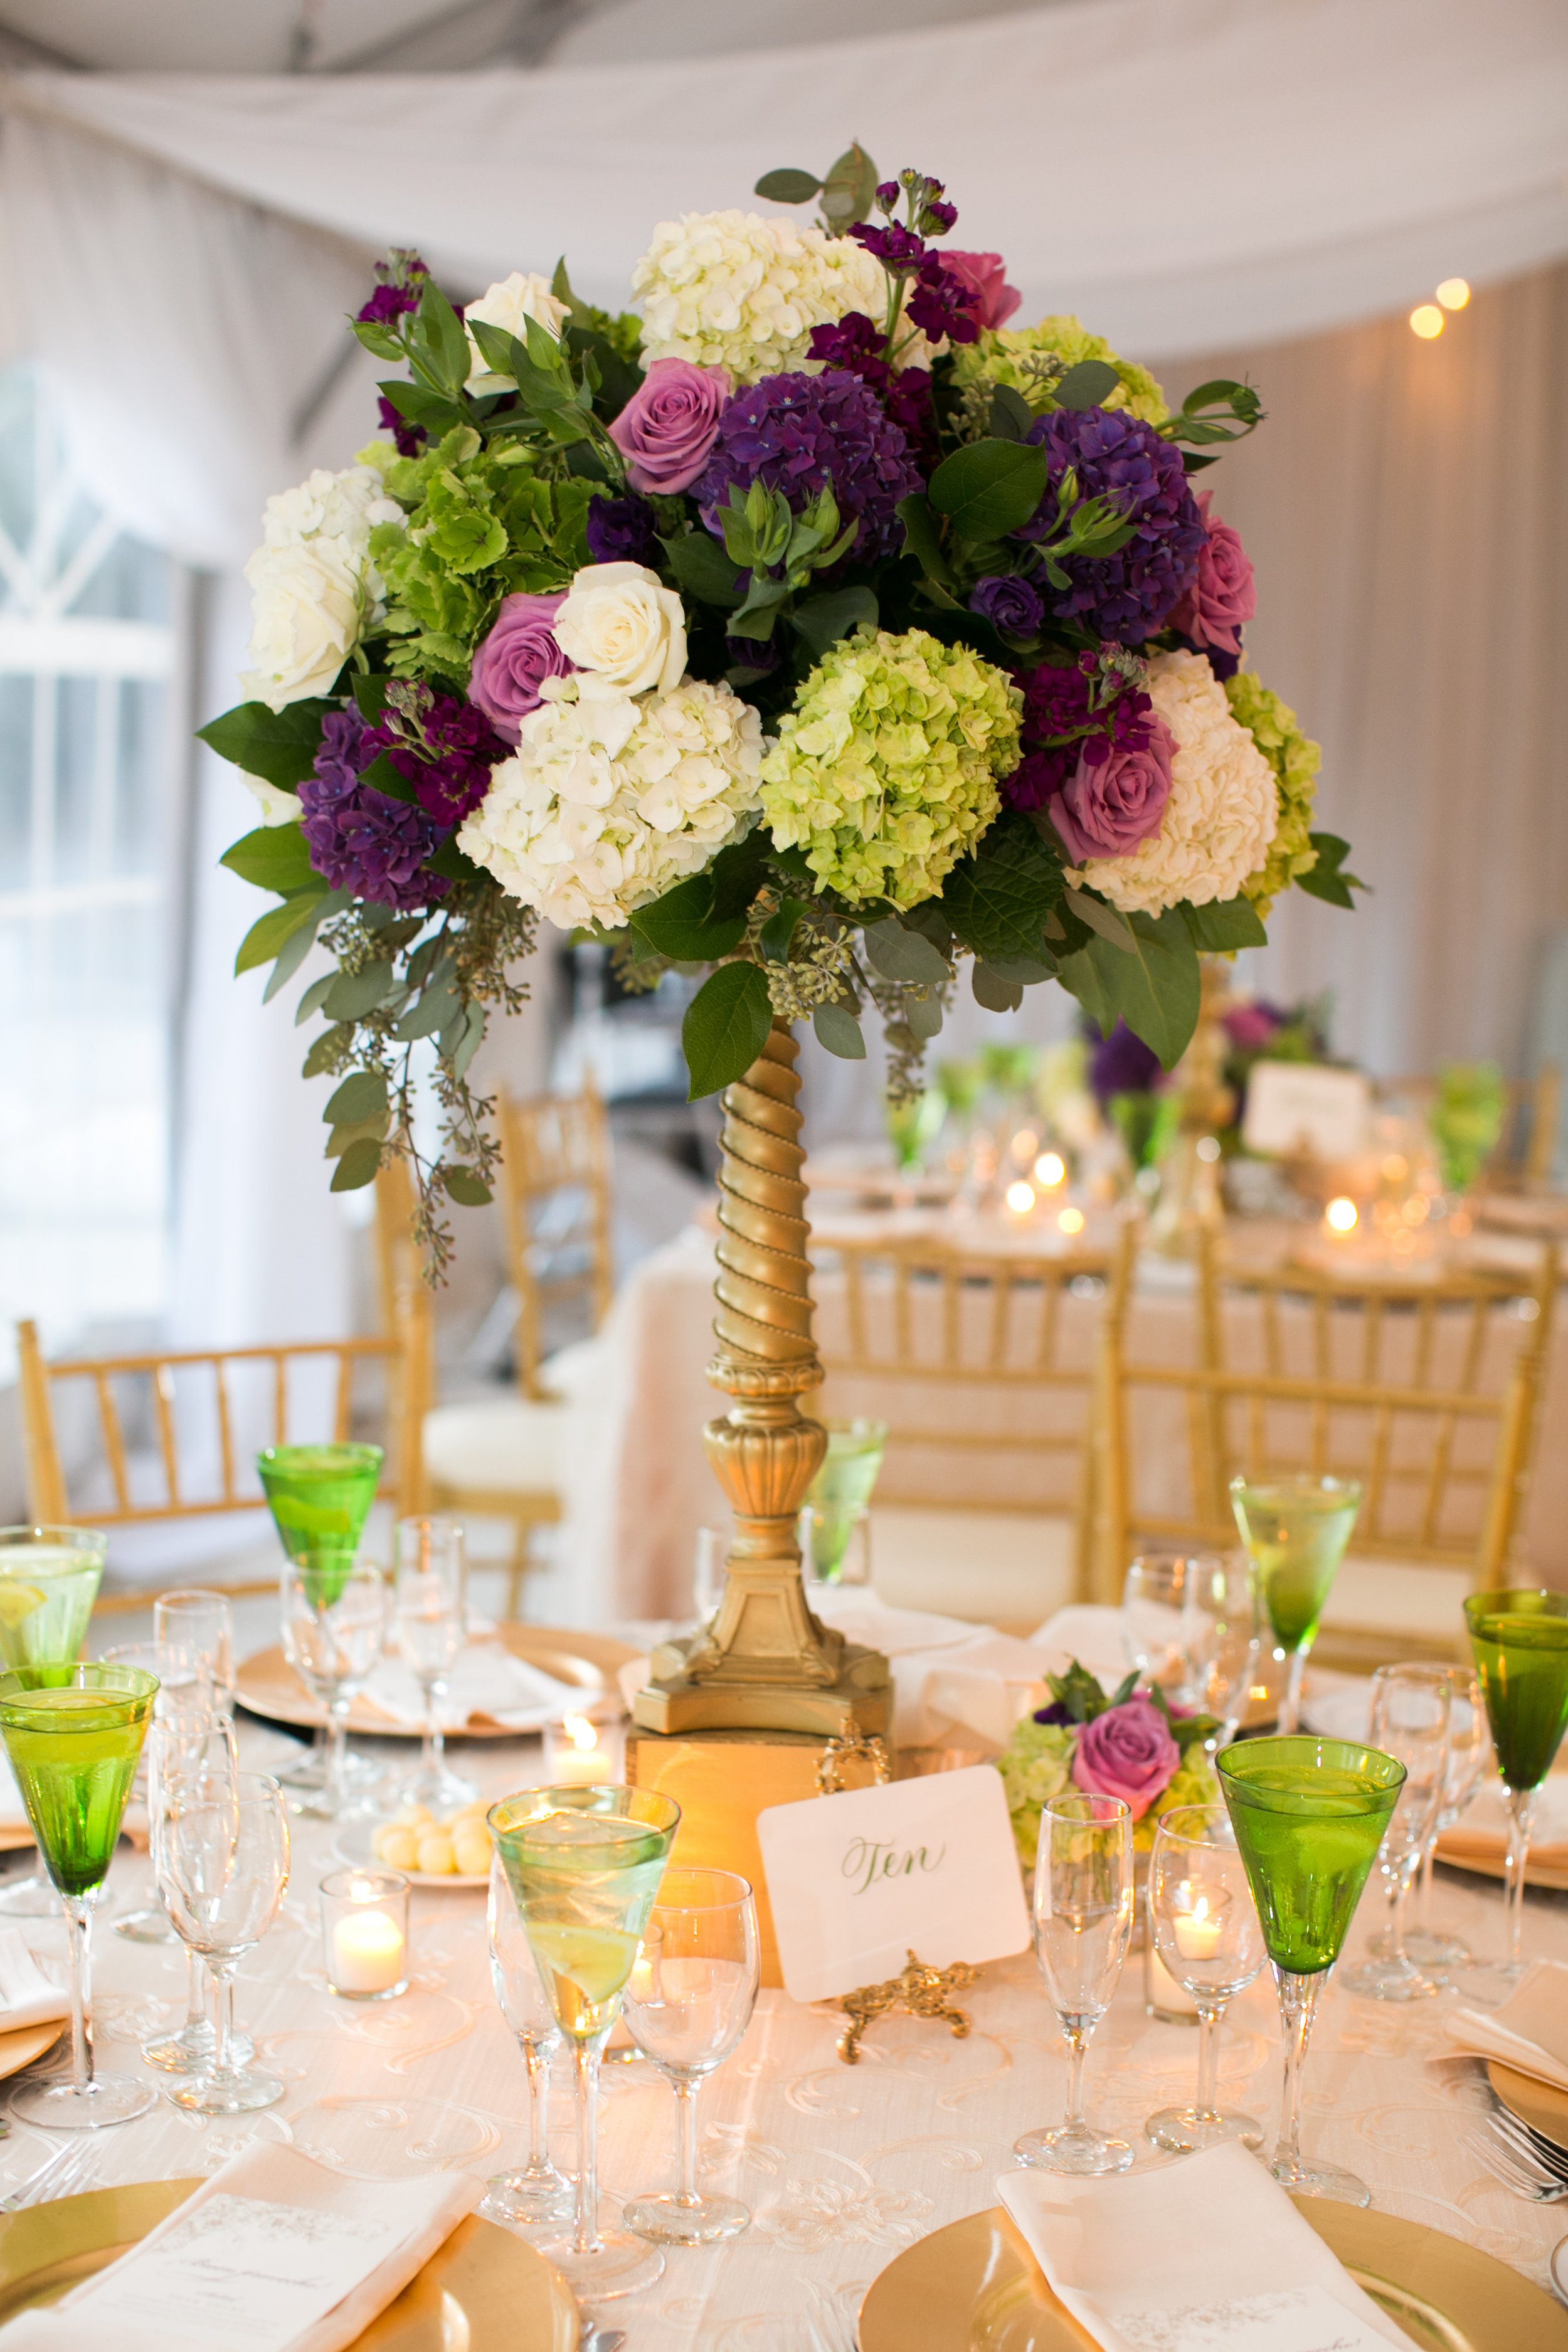 The tent was filled with two styles of table decor - this tall centerpiece in purple, white, lavender and green with an "old gold" vintage riser.&nbsp;